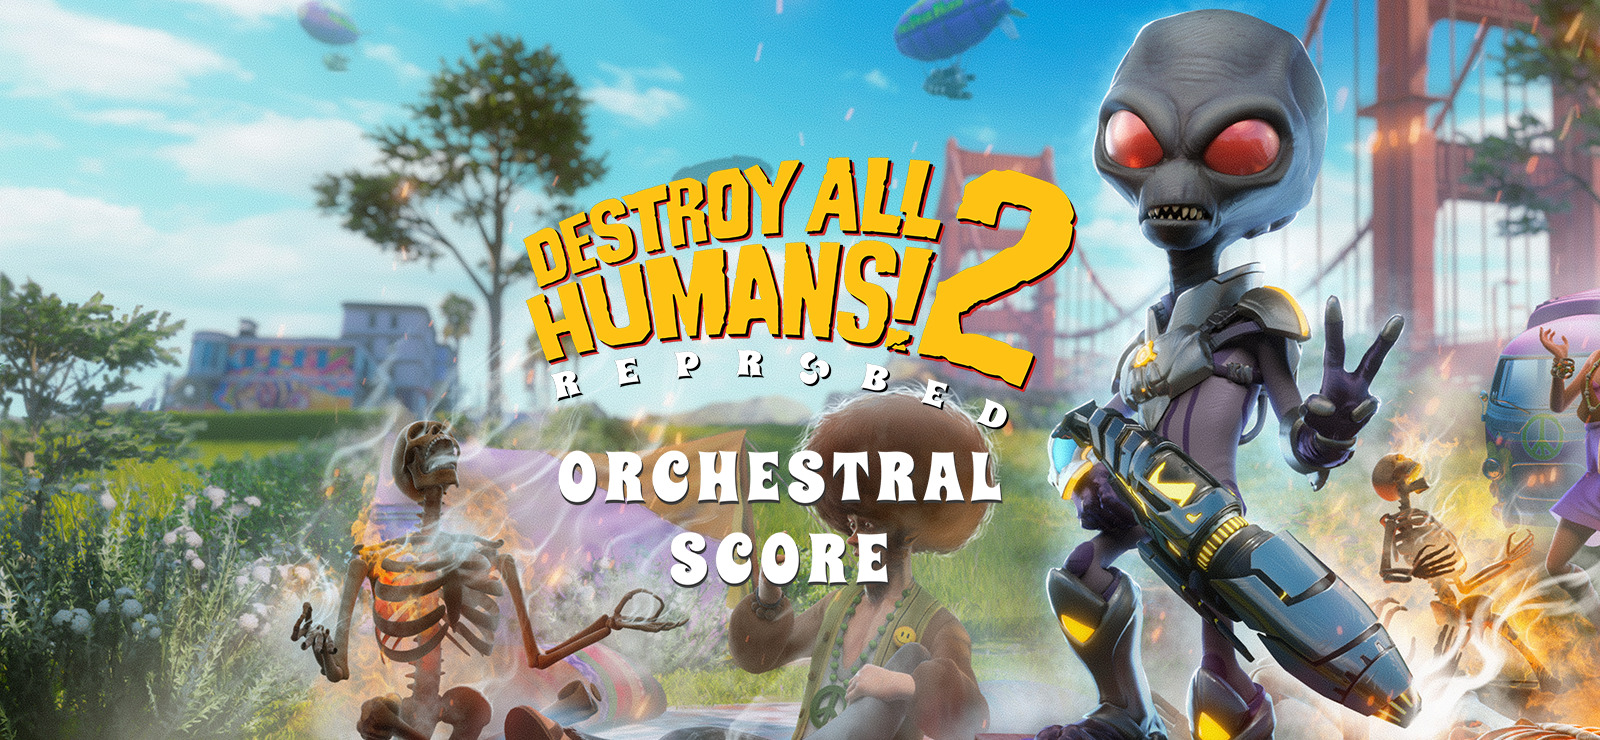 Destroy all humans reprobed. Destroy all Humans 2. Destroy all Humans!. Destroy all Humans! 2 - Reprobed: Official Orchestral score. Destroy all Humans! 2 - Reprobed диск ps4.